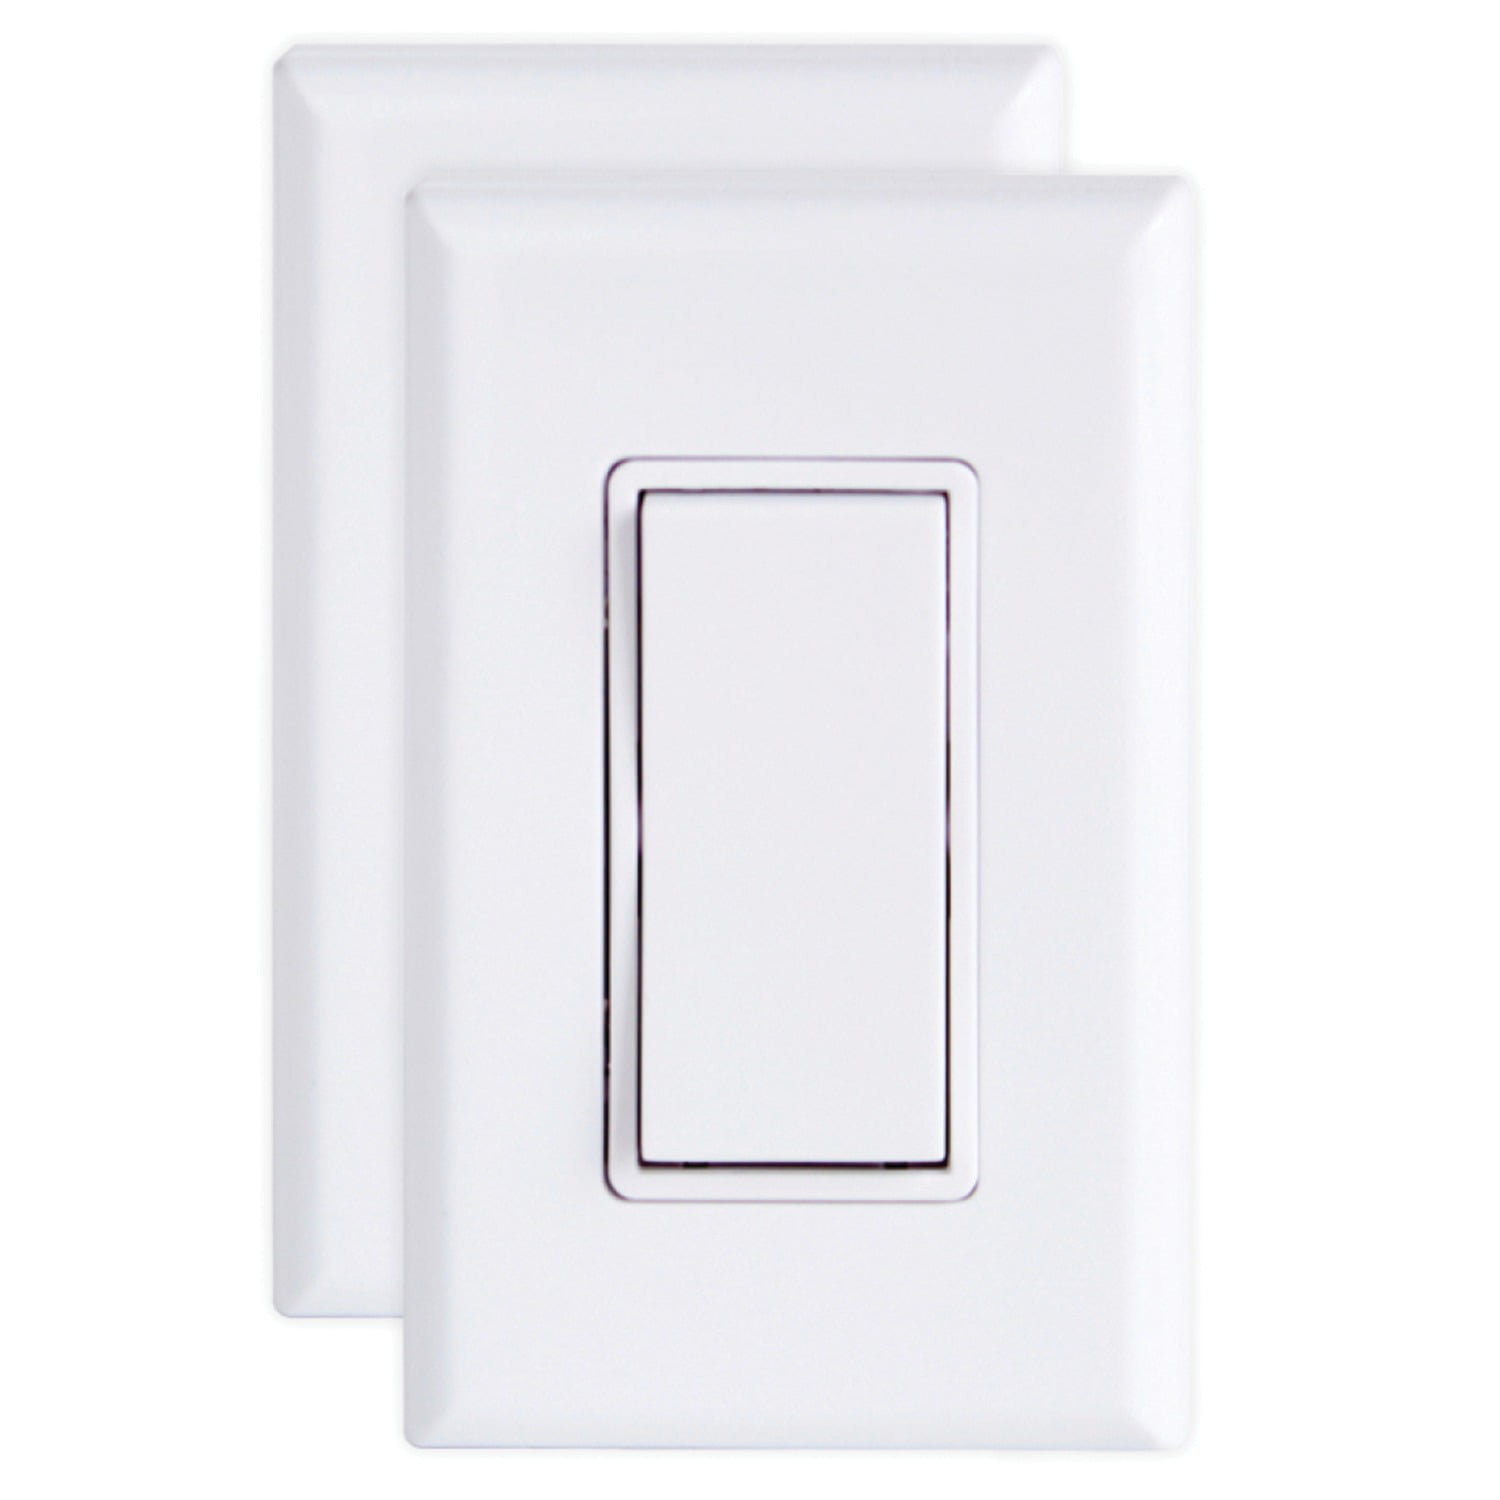 RunLessWire Simple Wireless Light Switch Kit, No-Wires and Battery-Free Light Switches for Home (1 Receiver and 1 Light Switch) RW9-SKBK